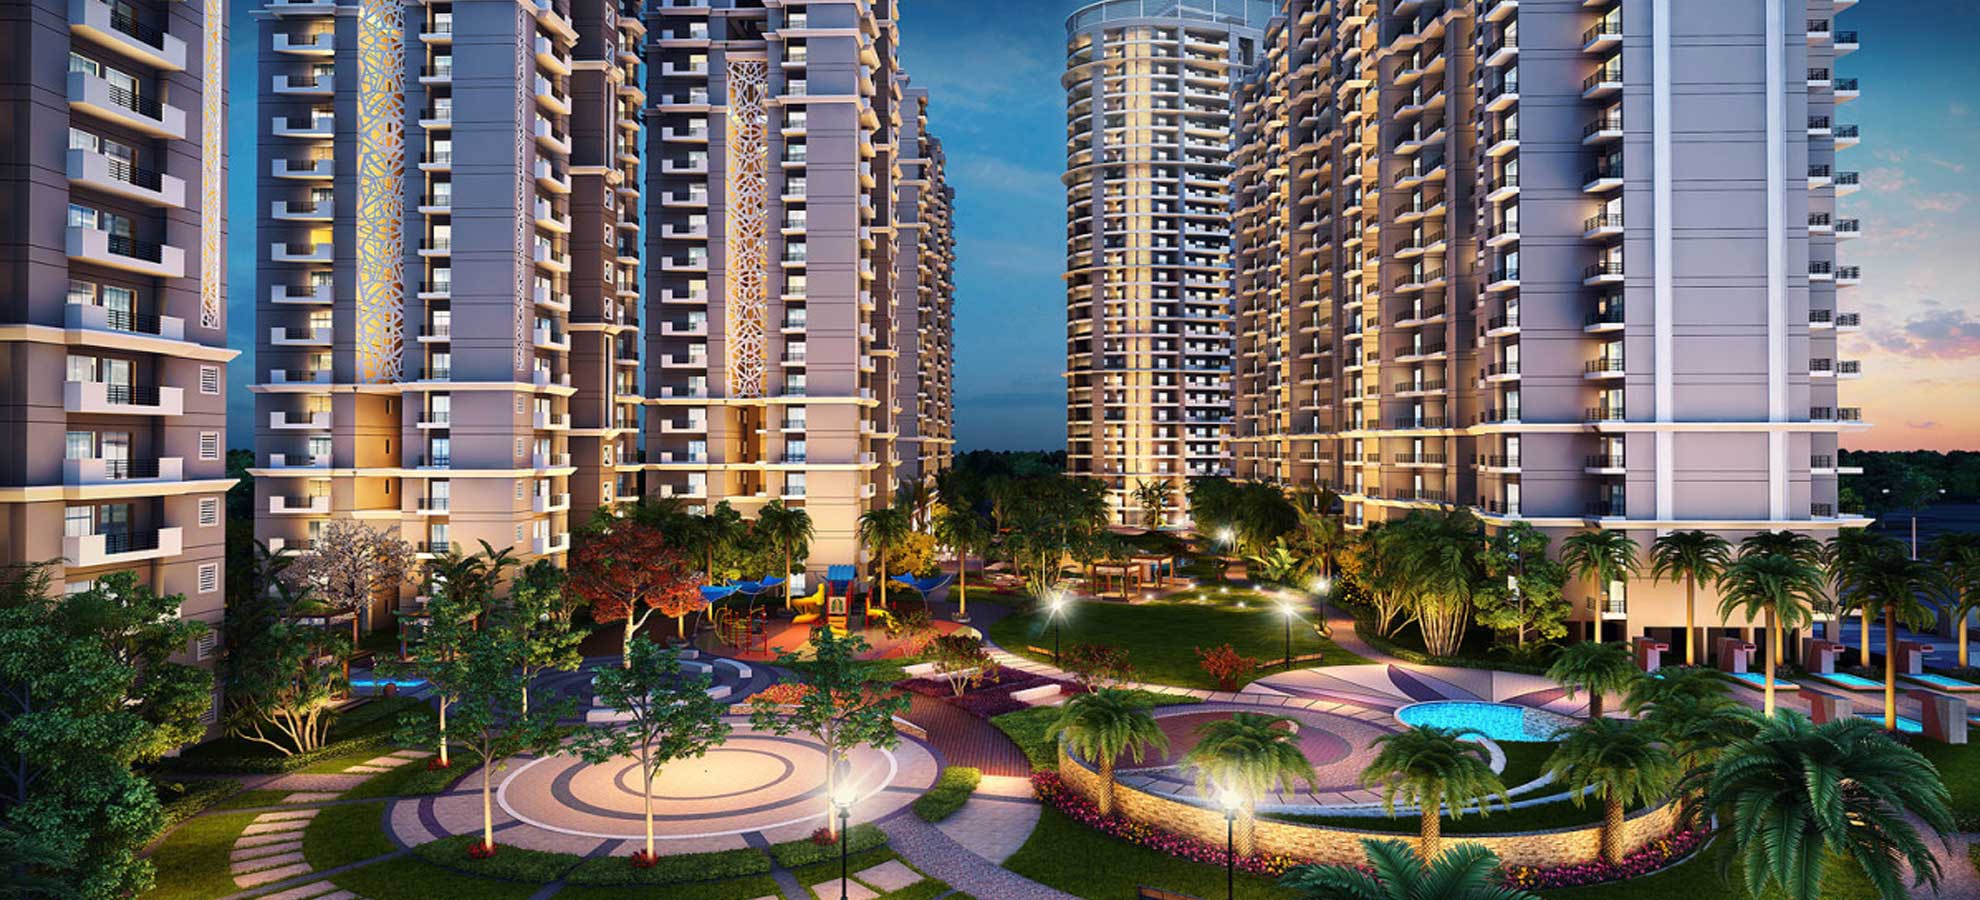 Noida Sector 150 Projects